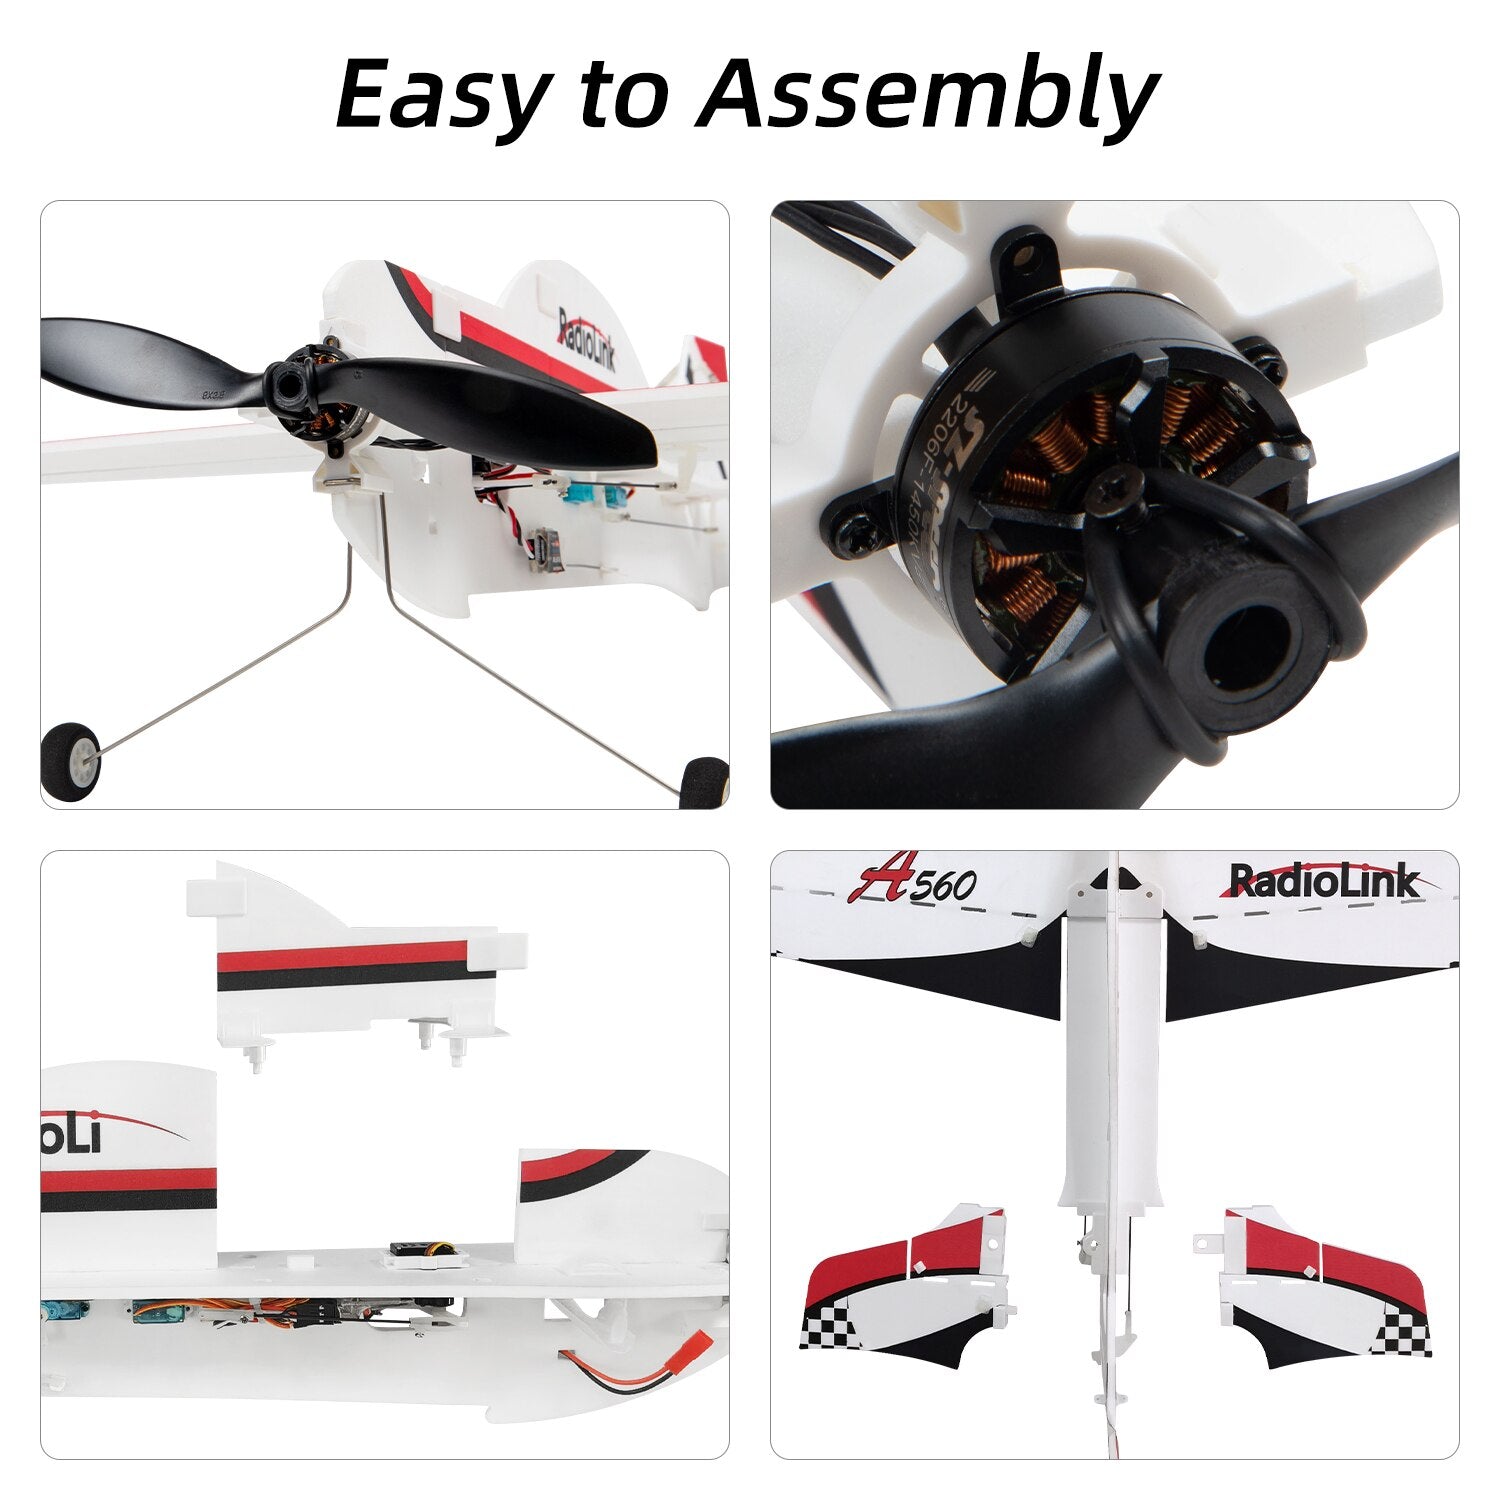 Radiolink A560 Airplane - RTF PNP 4CH RC Plane 580mm Wingspan 6 Modes Ready to Fly 3D EPP Trainer Beginner Set Gyro Assist System